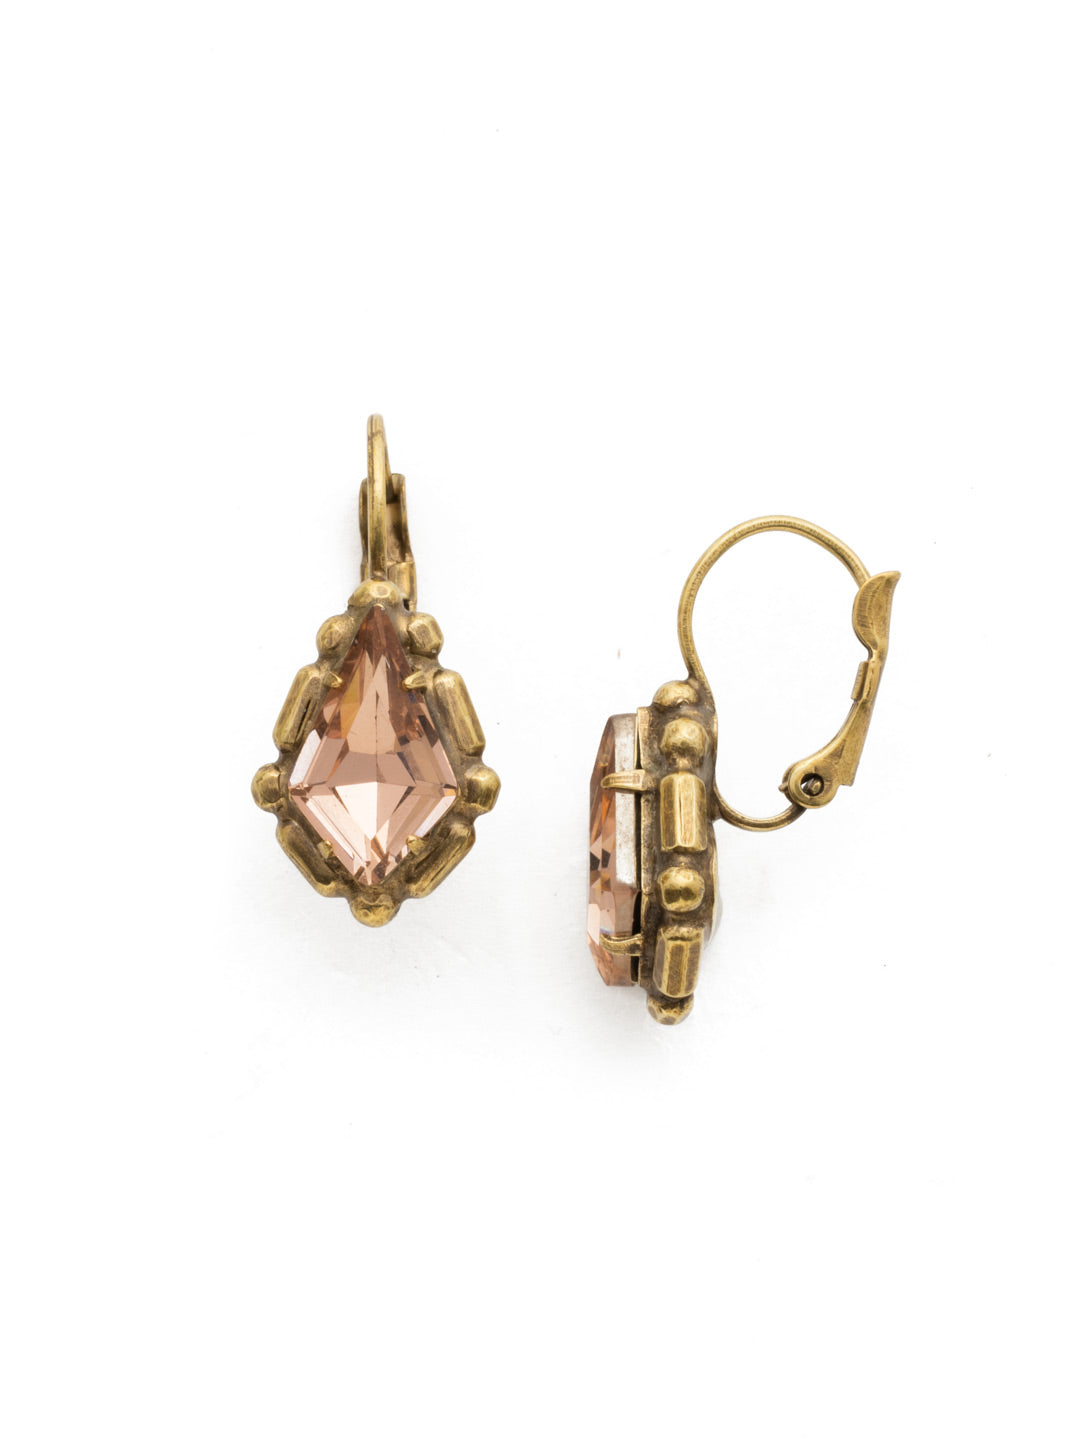 Petite Hawthorn Earring - EDX19AGSTN - A petite diamond shaped stone in a detailed metal setting hangs from a slim french wire on this everyday stunner.